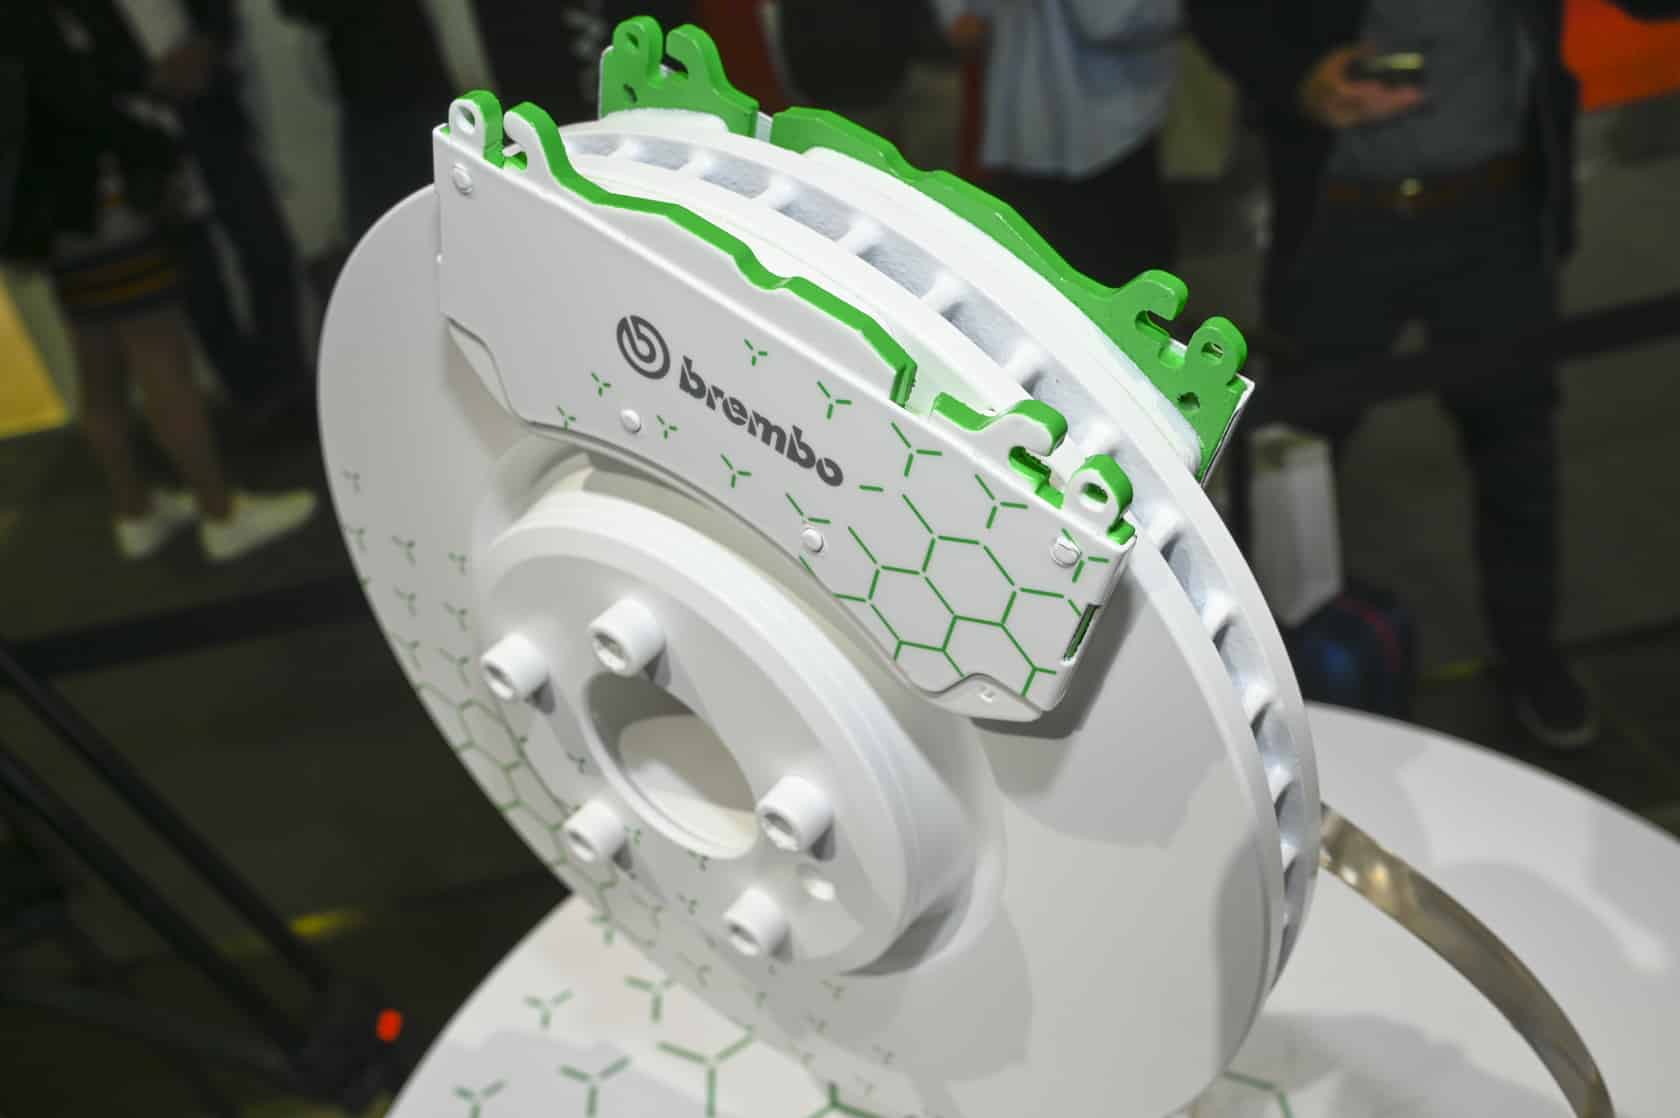 Brembo introduced its new Greenance Concept Kit braking solution